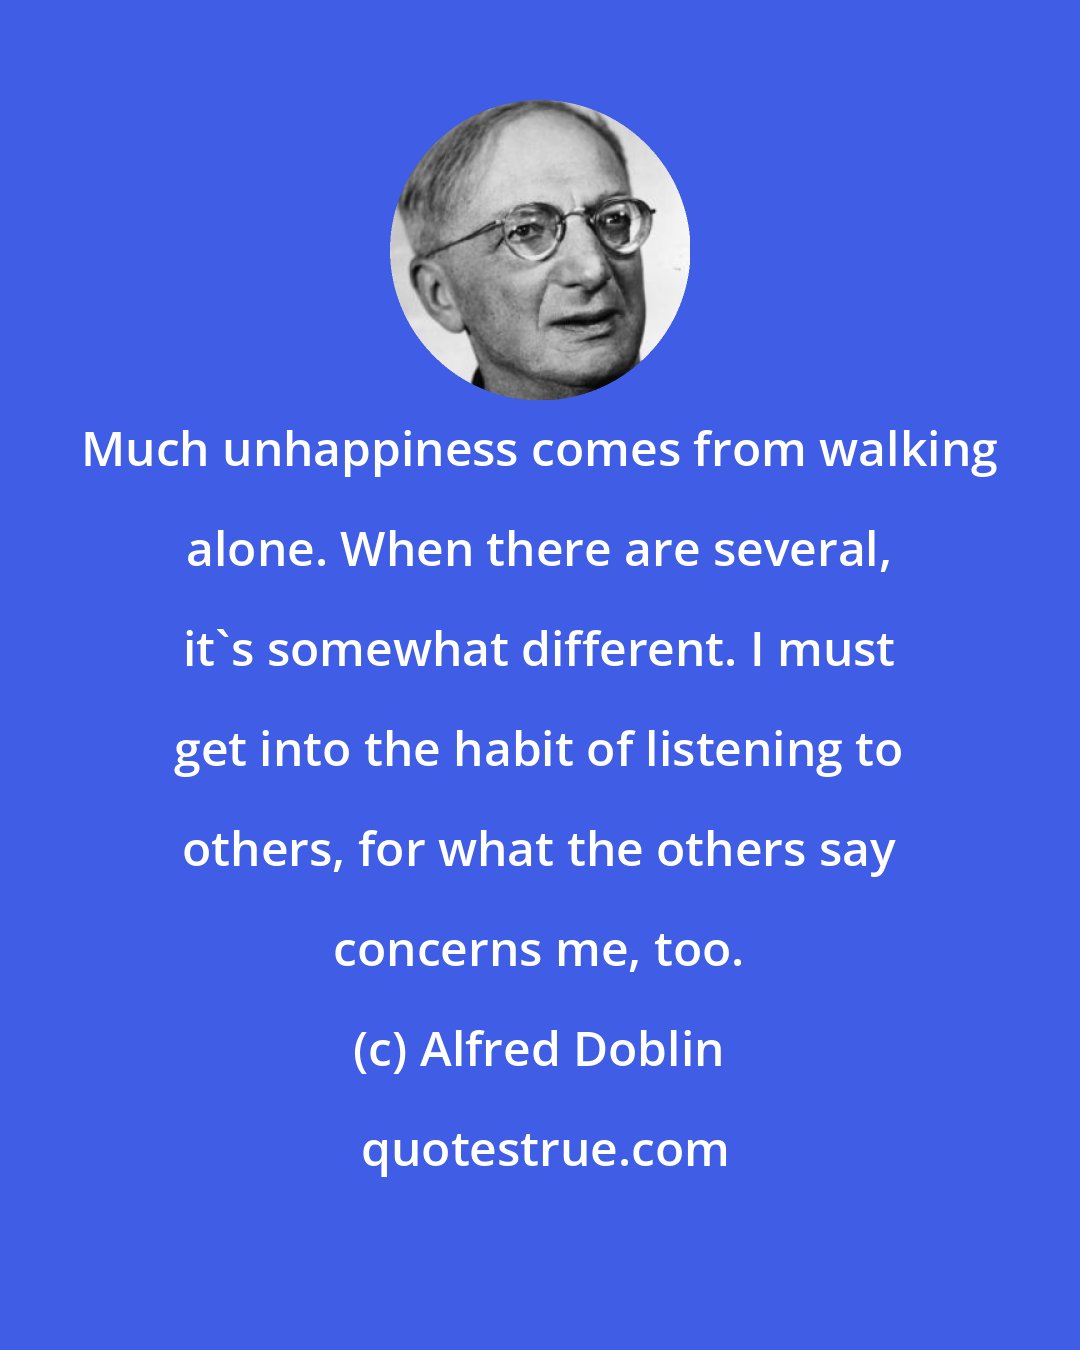 Alfred Doblin: Much unhappiness comes from walking alone. When there are several, it's somewhat different. I must get into the habit of listening to others, for what the others say concerns me, too.